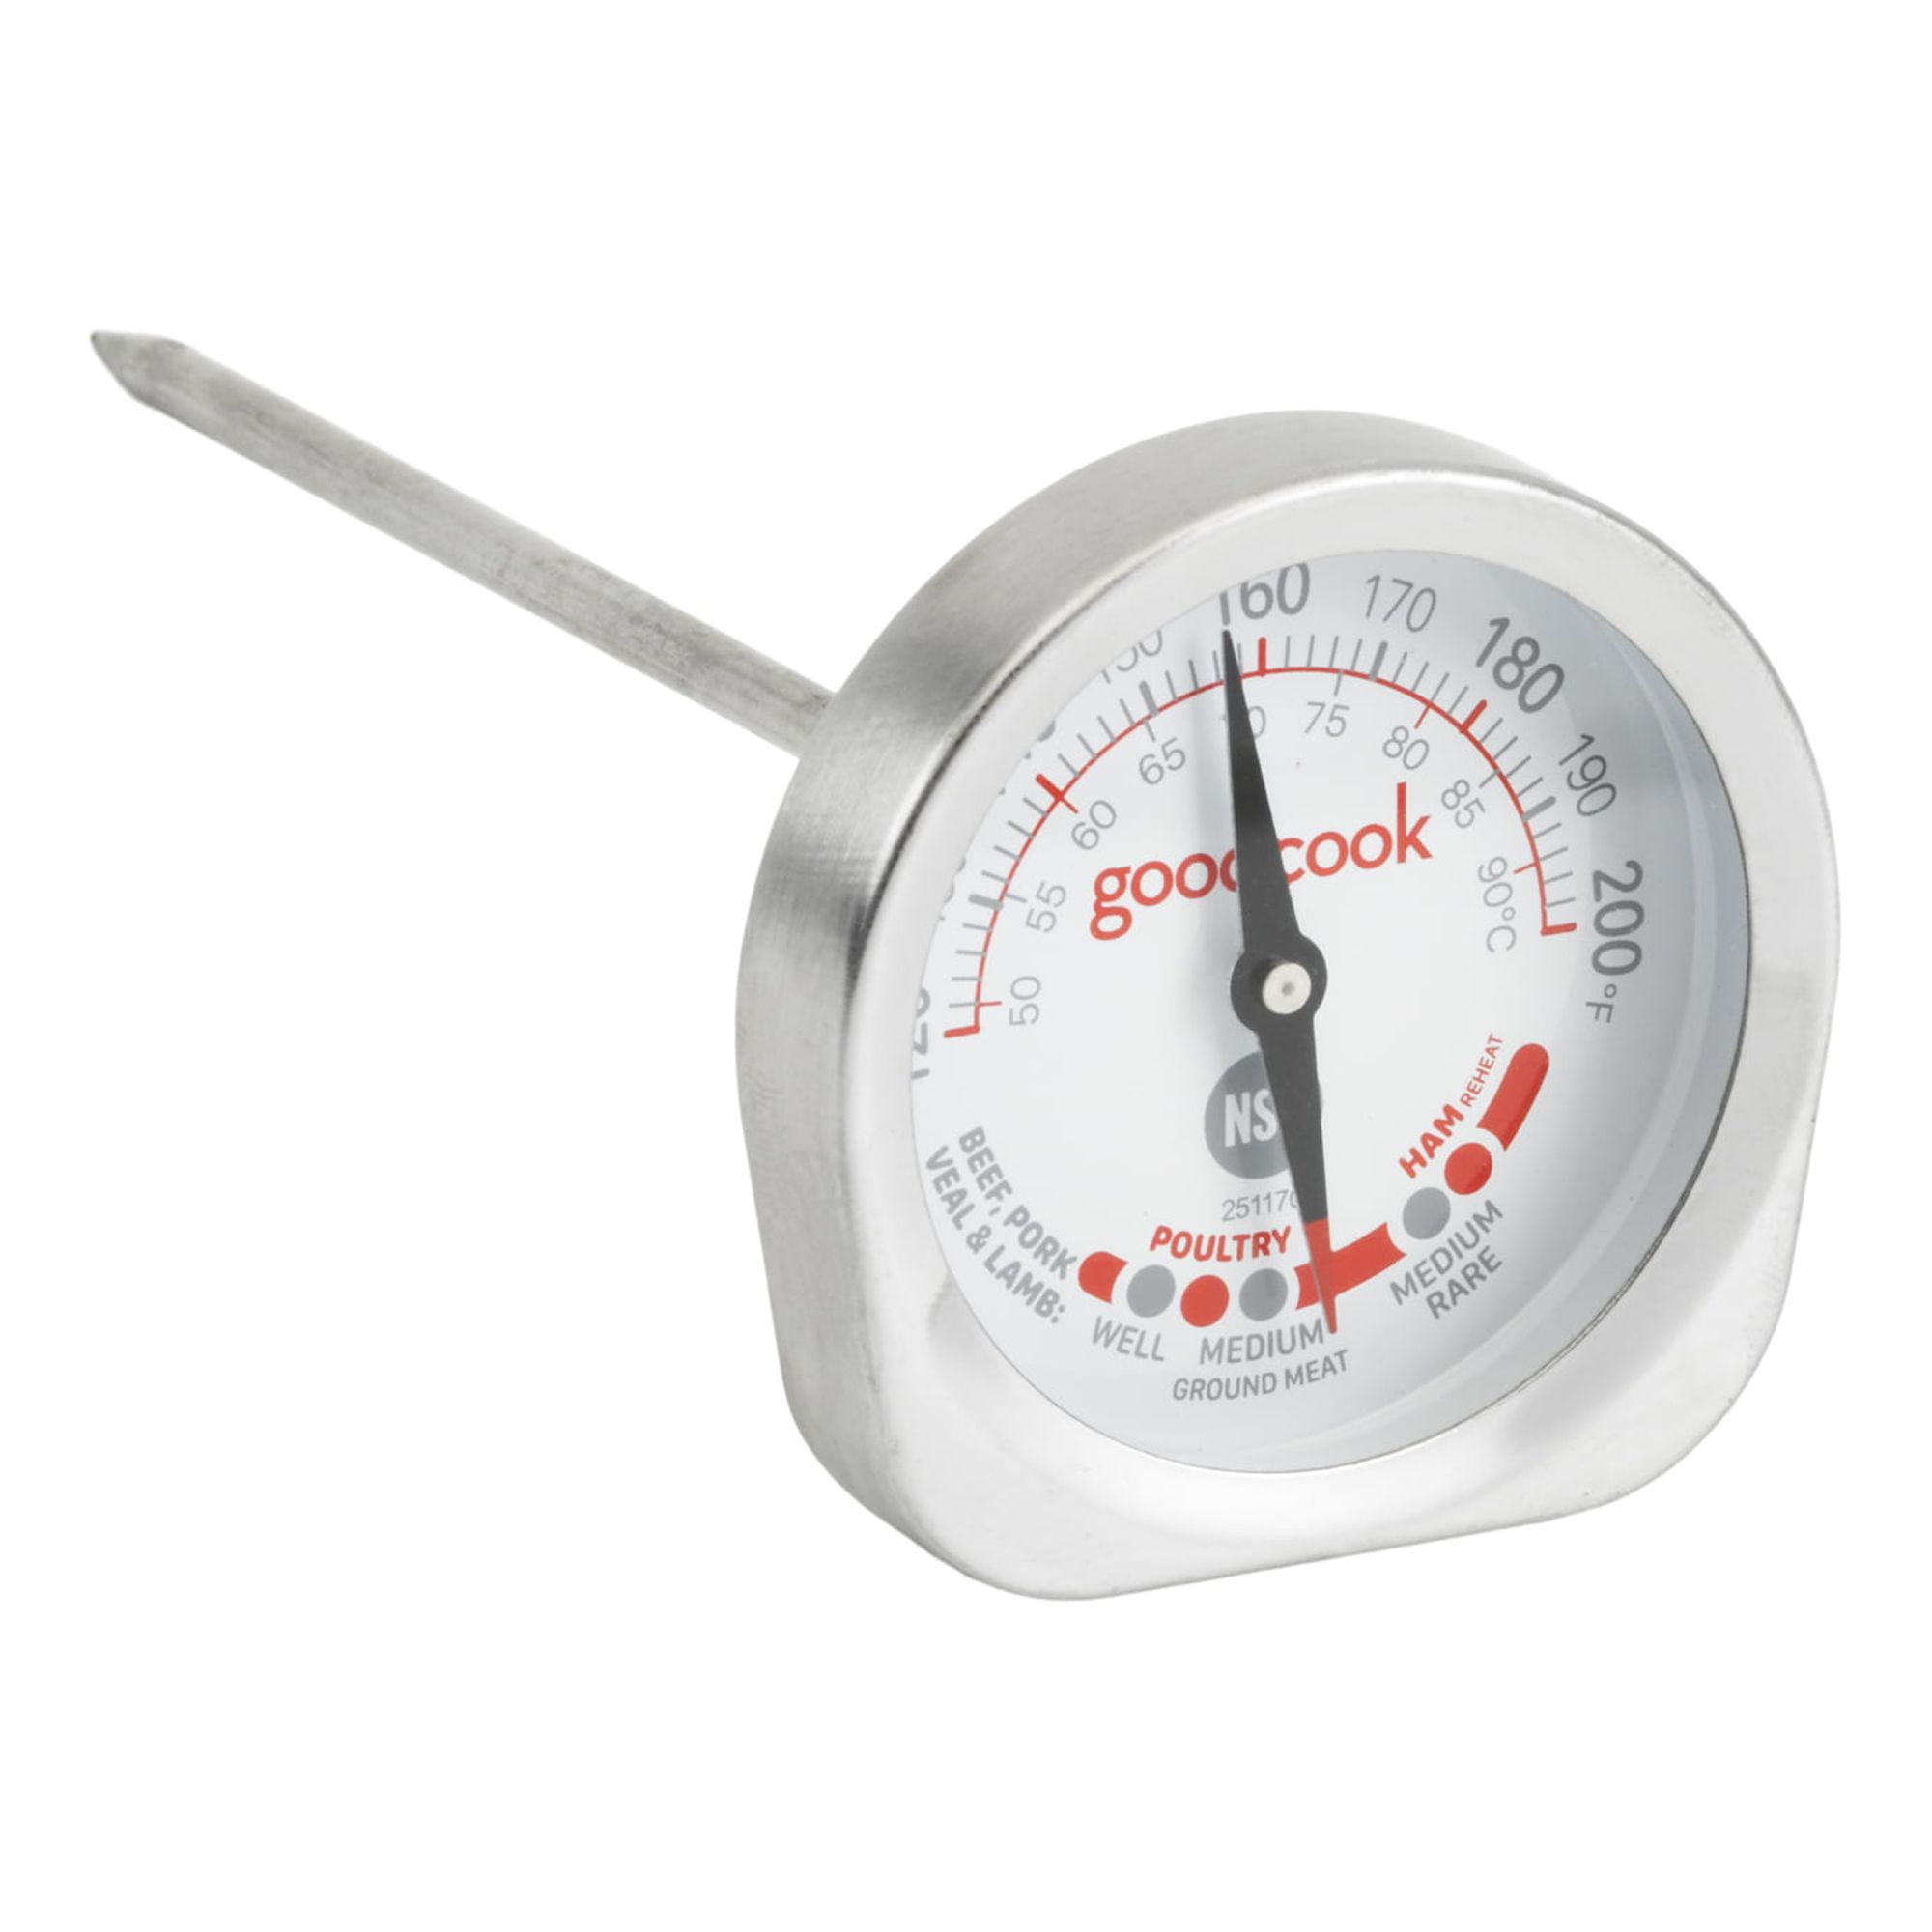 This $14 food thermometer has more than 5,700 5-star reviews